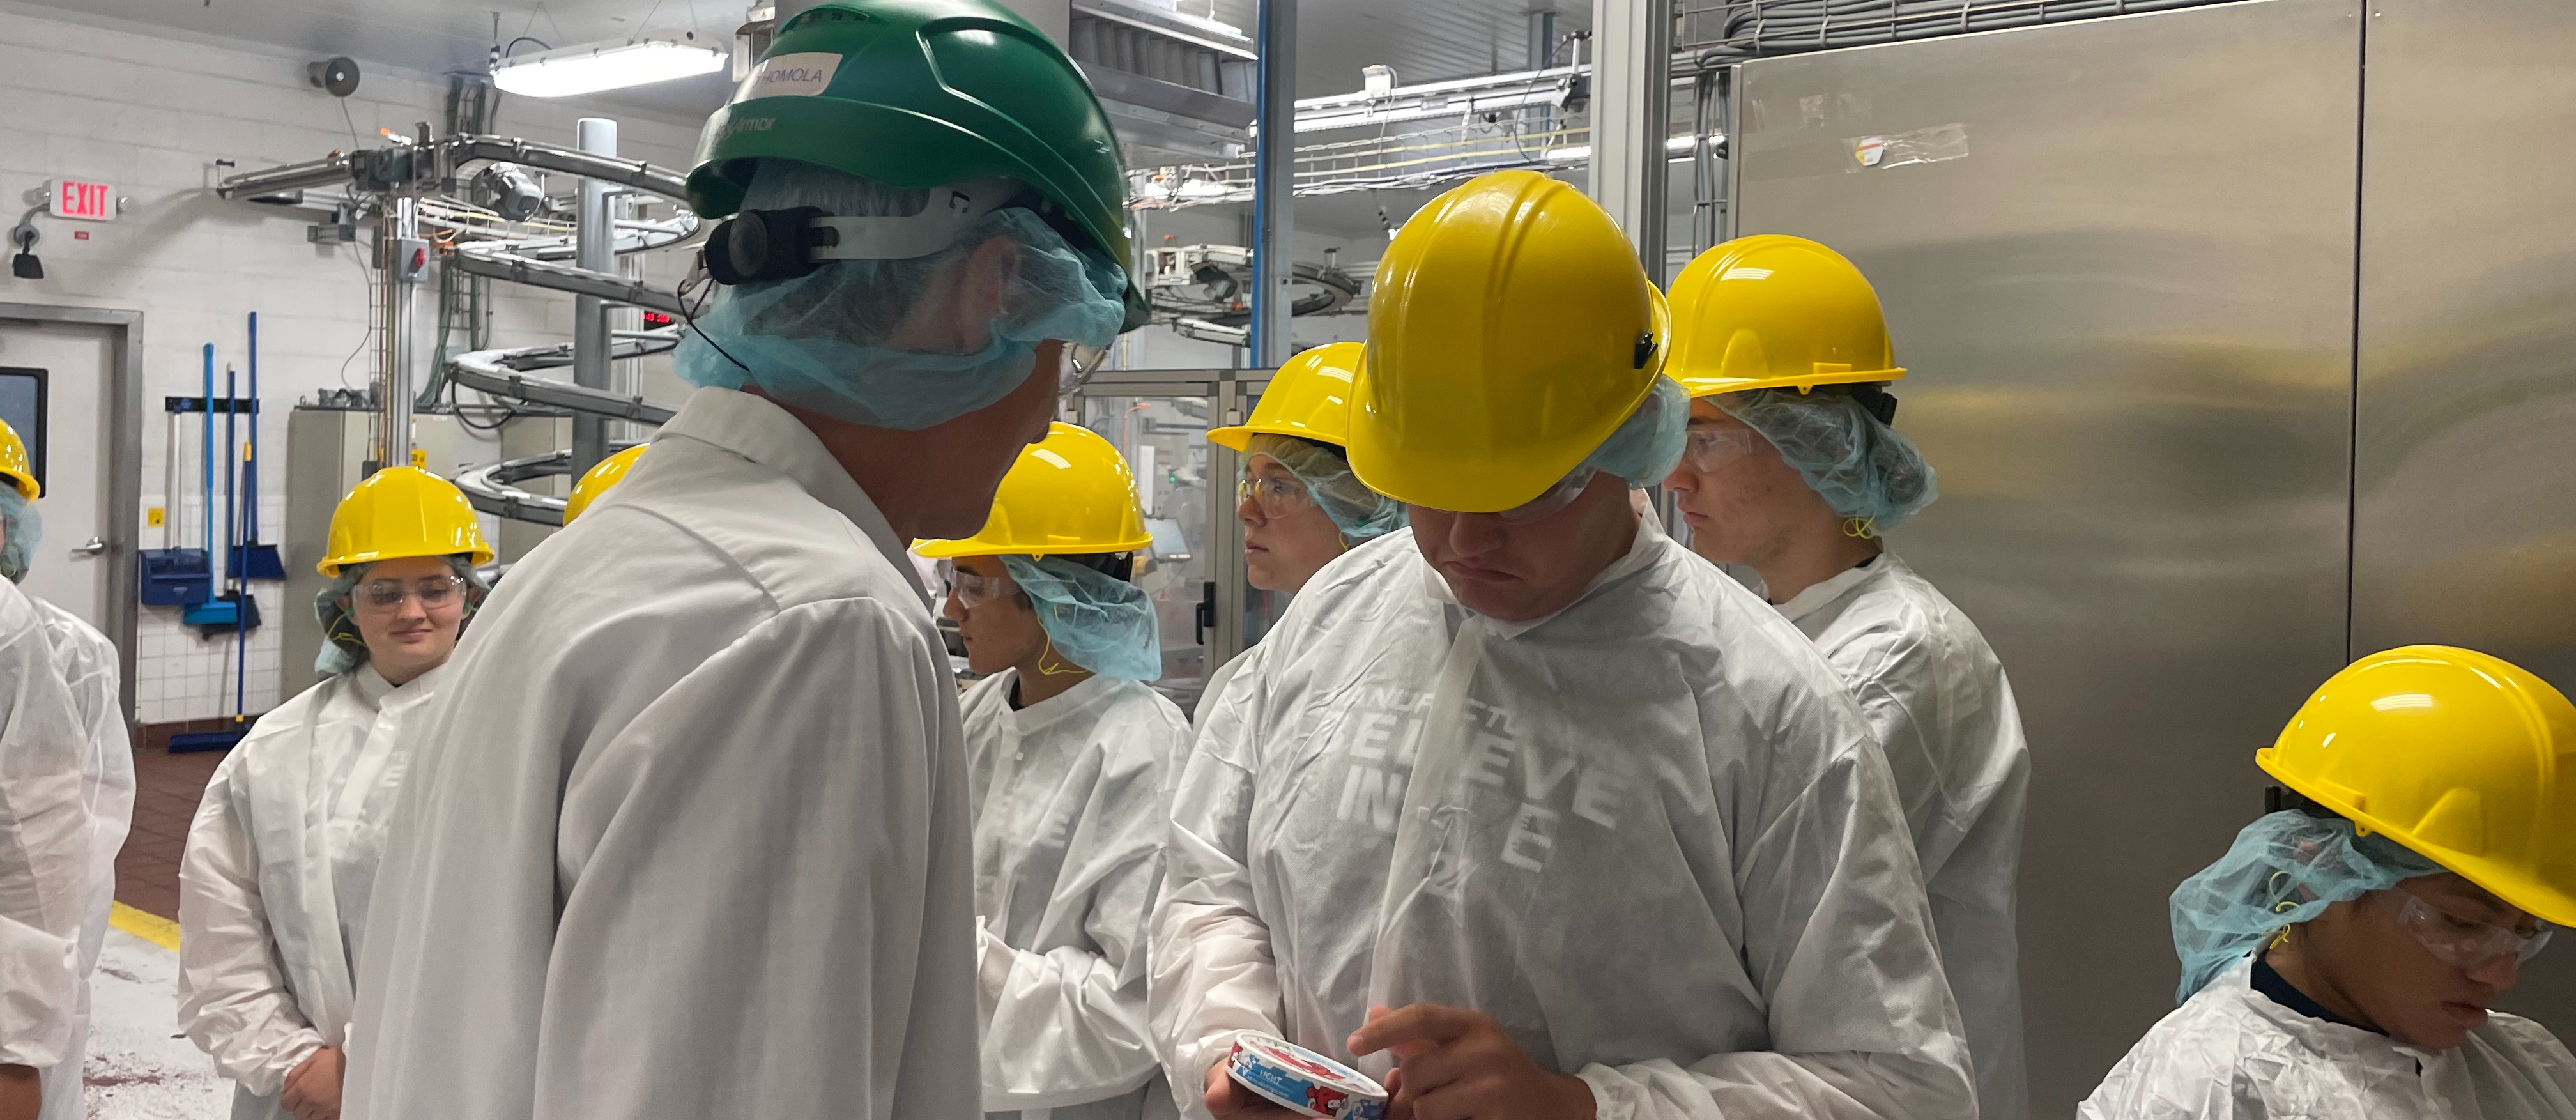 Students in hygenic apparel and hard hats tour Bel Brands